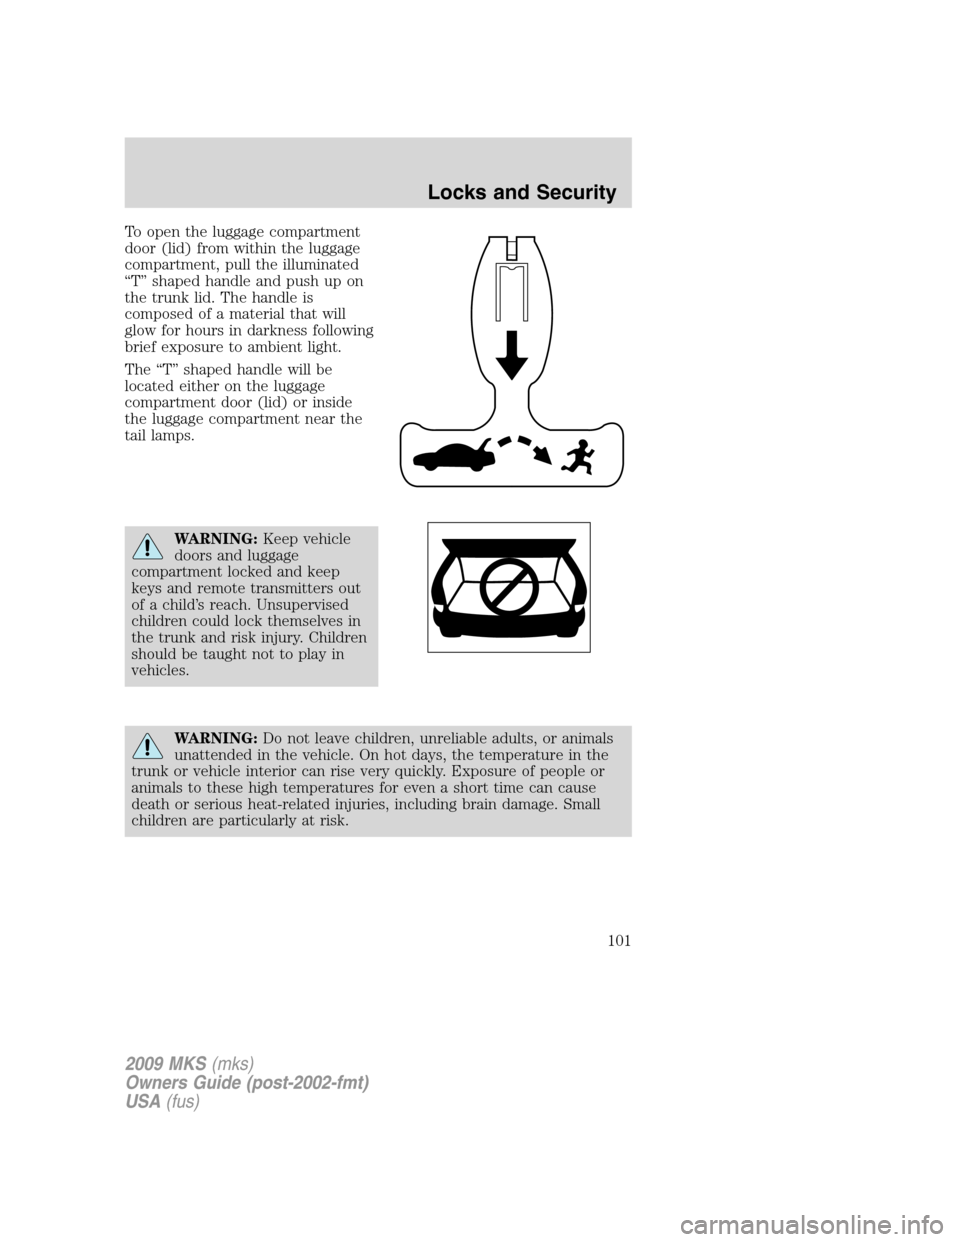 LINCOLN MKS 2009  Owners Manual To open the luggage compartment
door (lid) from within the luggage
compartment, pull the illuminated
“T” shaped handle and push up on
the trunk lid. The handle is
composed of a material that will
